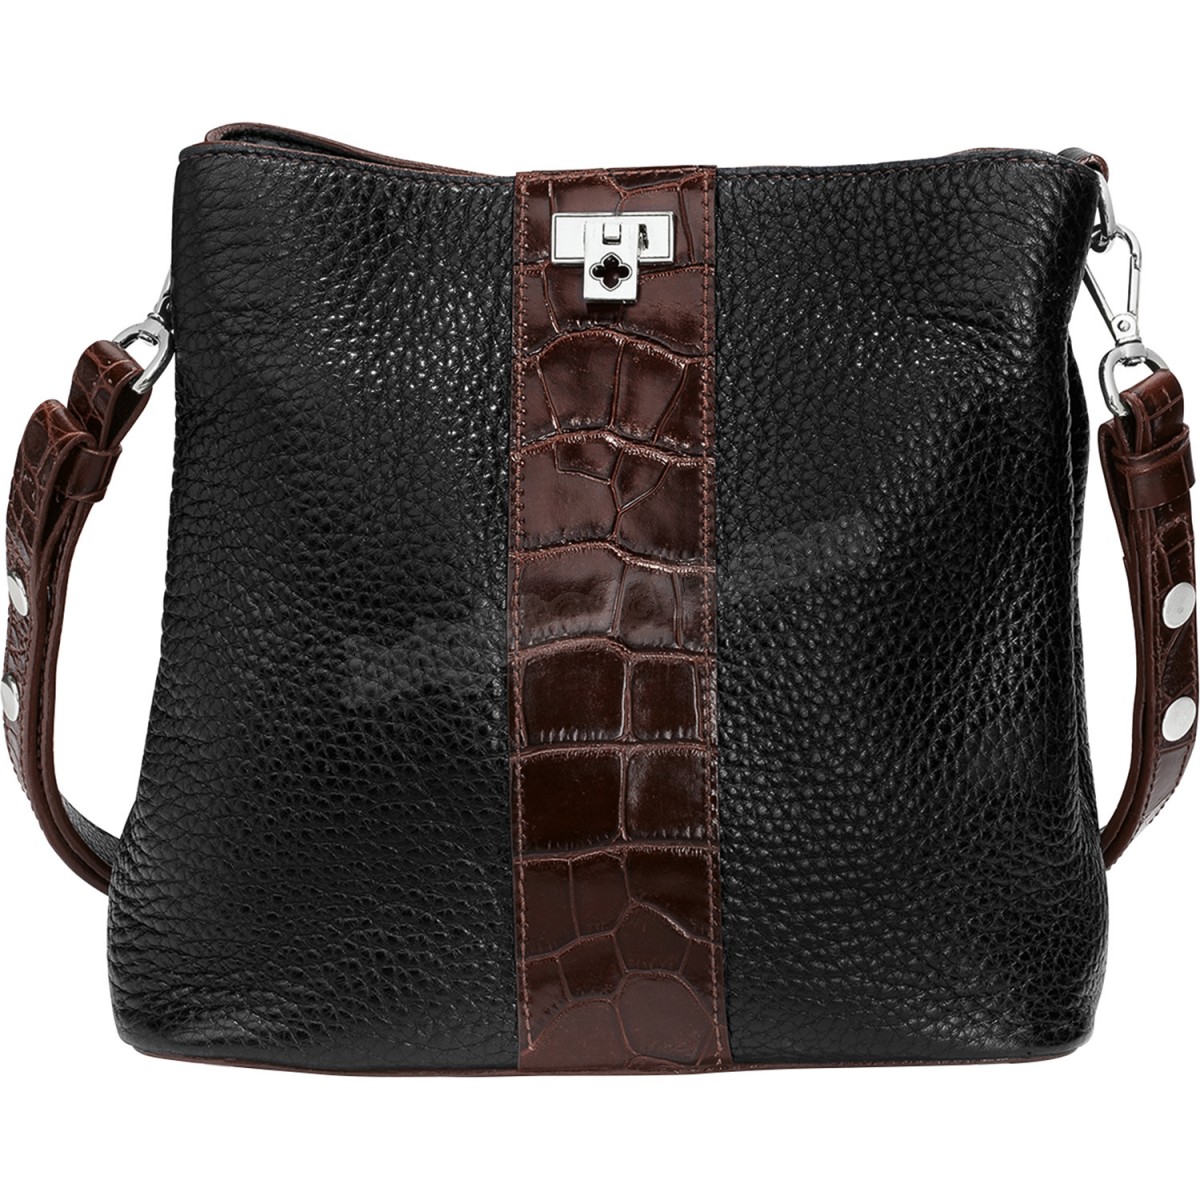 Brighton Collectibles & Online Discount Dayla Top Handle Cross Body - -0